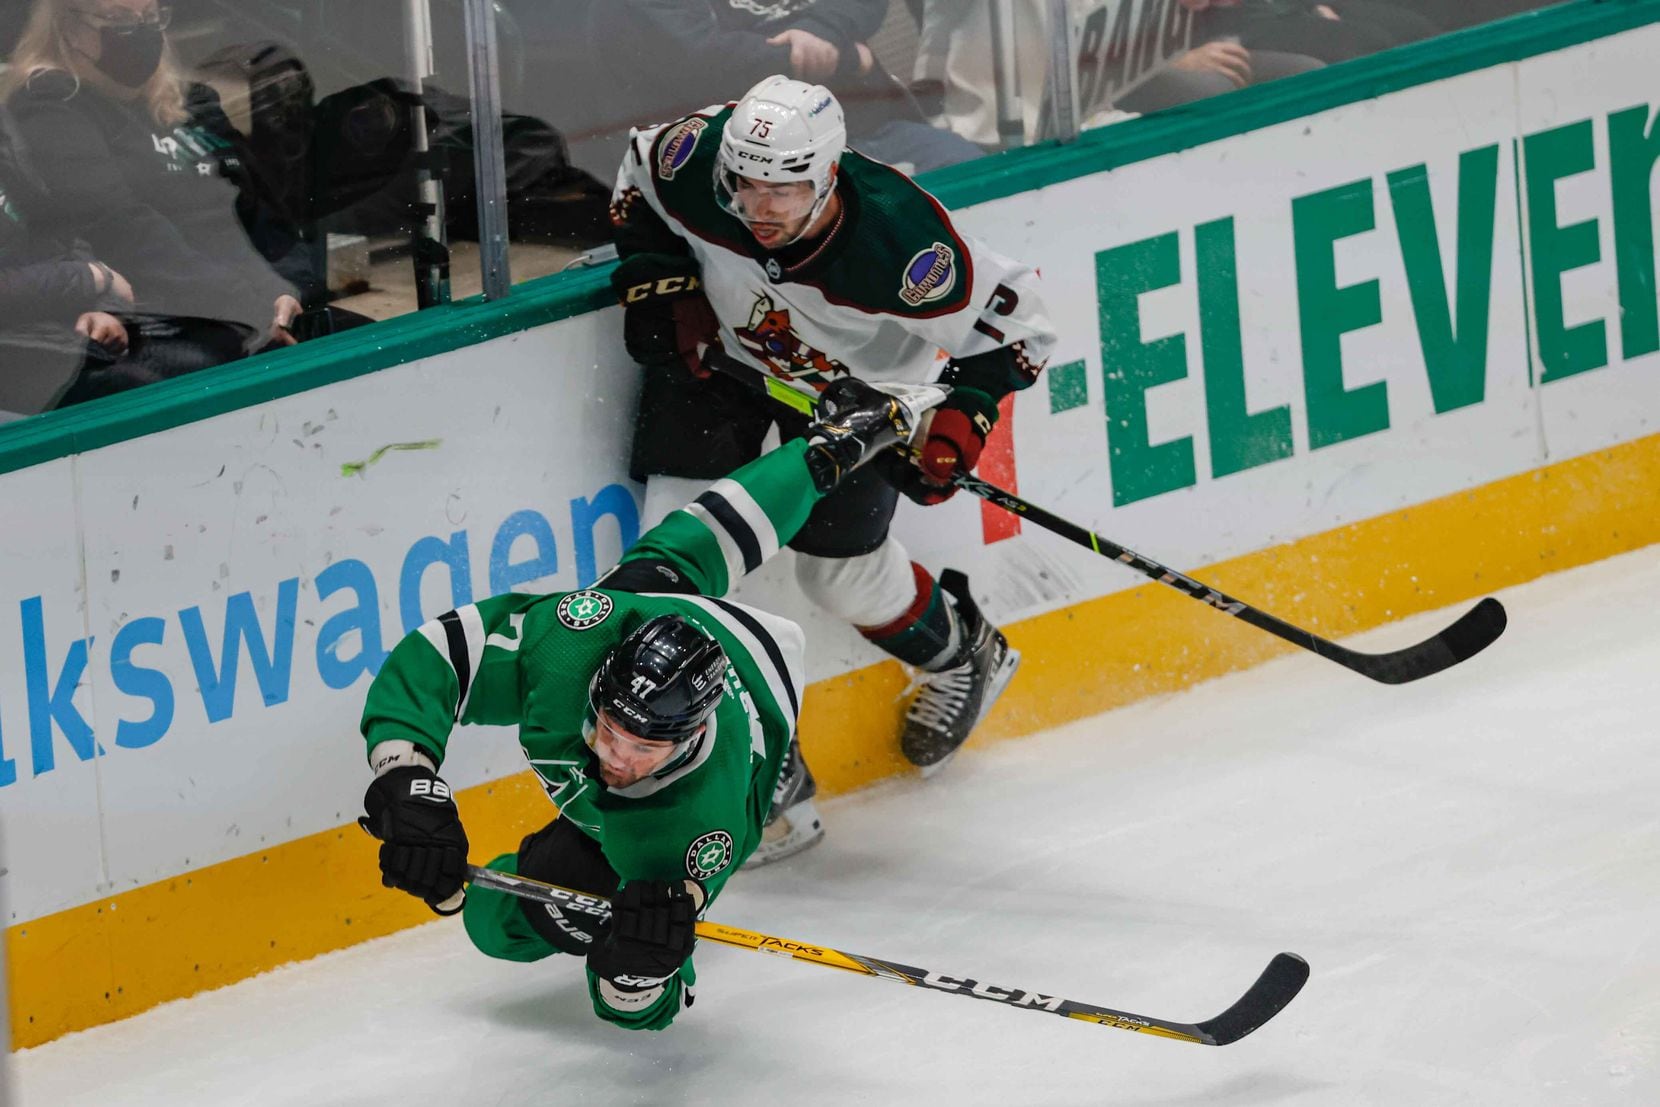 Dallas Stars right wing Alexander Radulov (47) stumbles next to Arizona Coyotes defenseman Kyle Capobianco (75) during first period at the American Airlines Center in Dallas on Monday, December 6, 2021. (Lola Gomez/The Dallas Morning News)